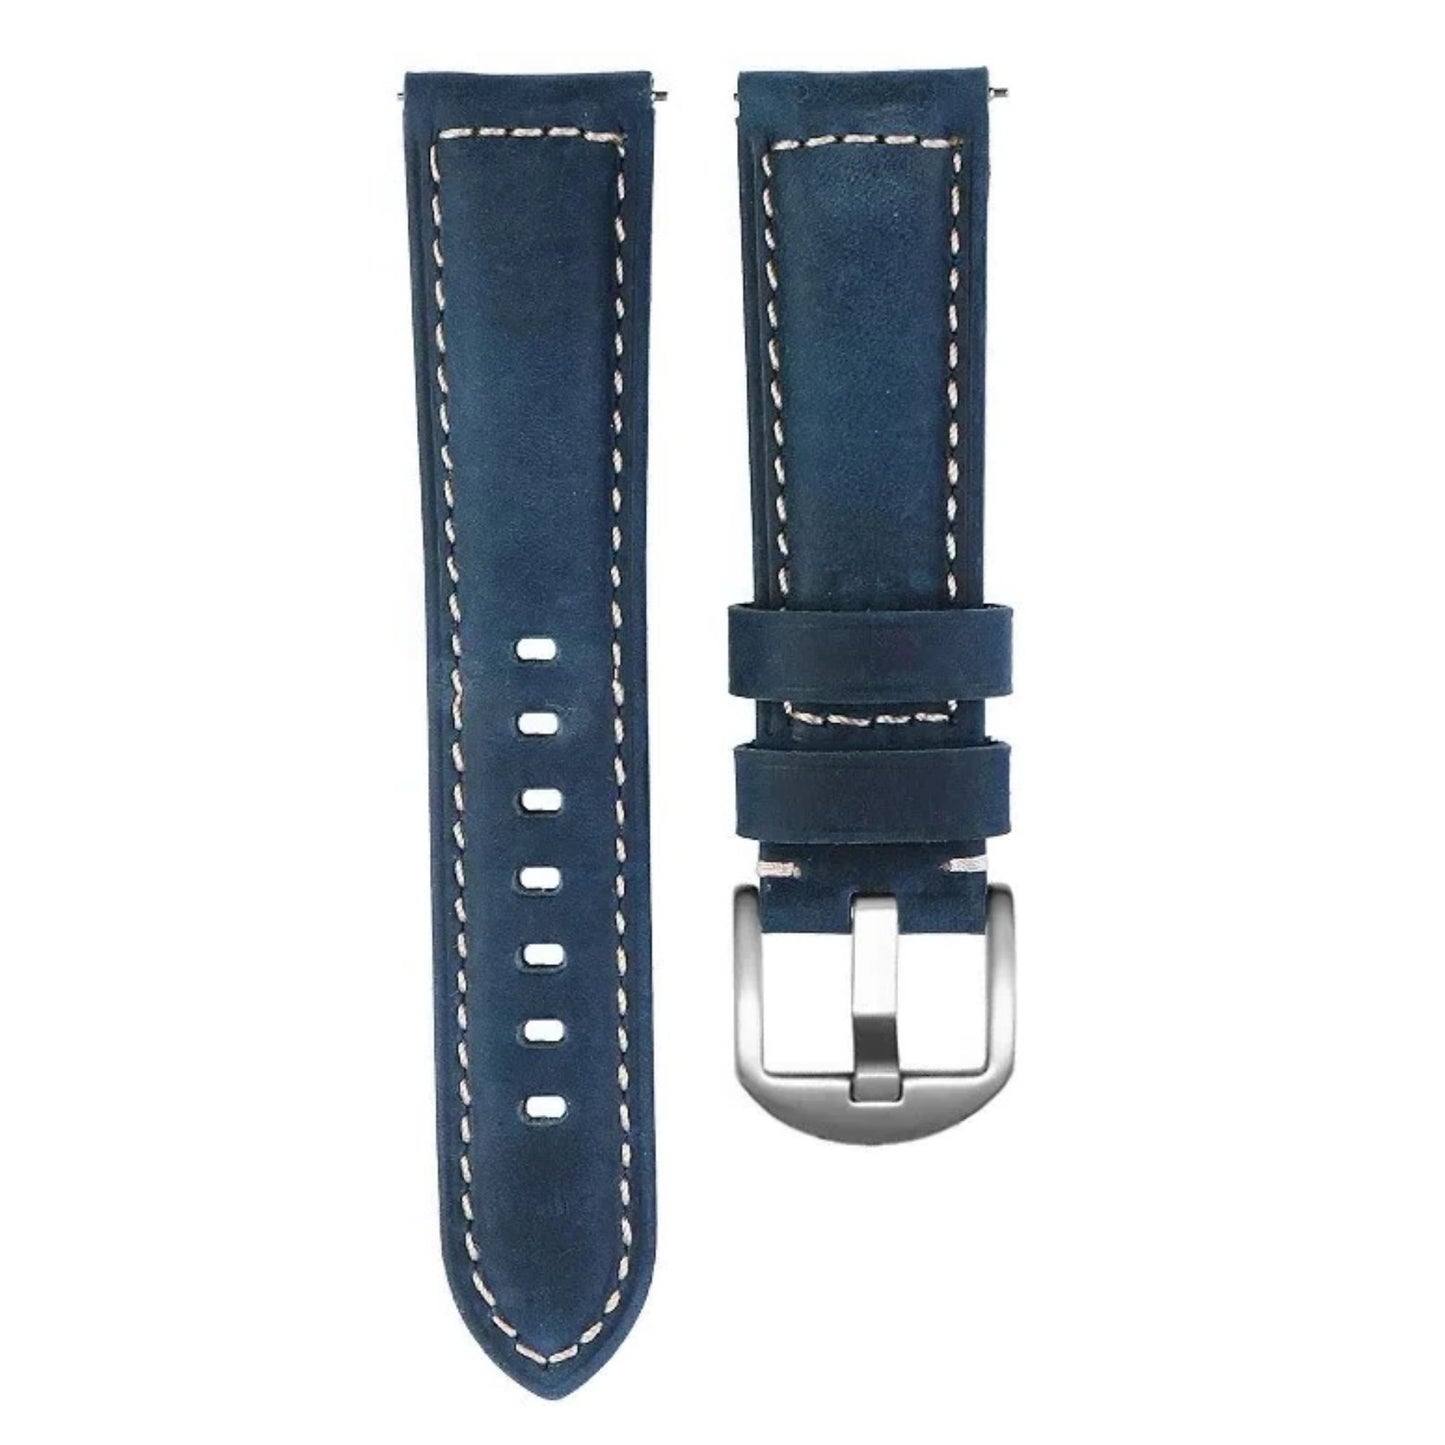 Omega Swatch MoonSwatch strap leather blue